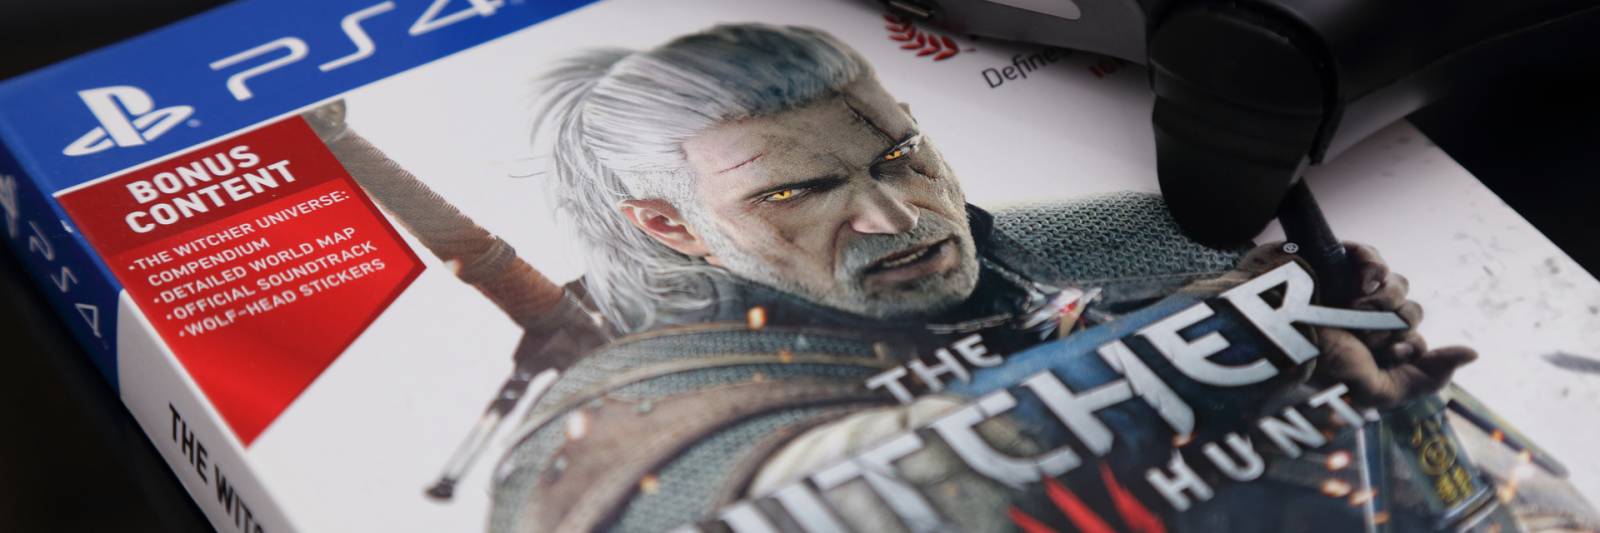 hackers auction stolen cd projekt data with ‘charity fundraiser'